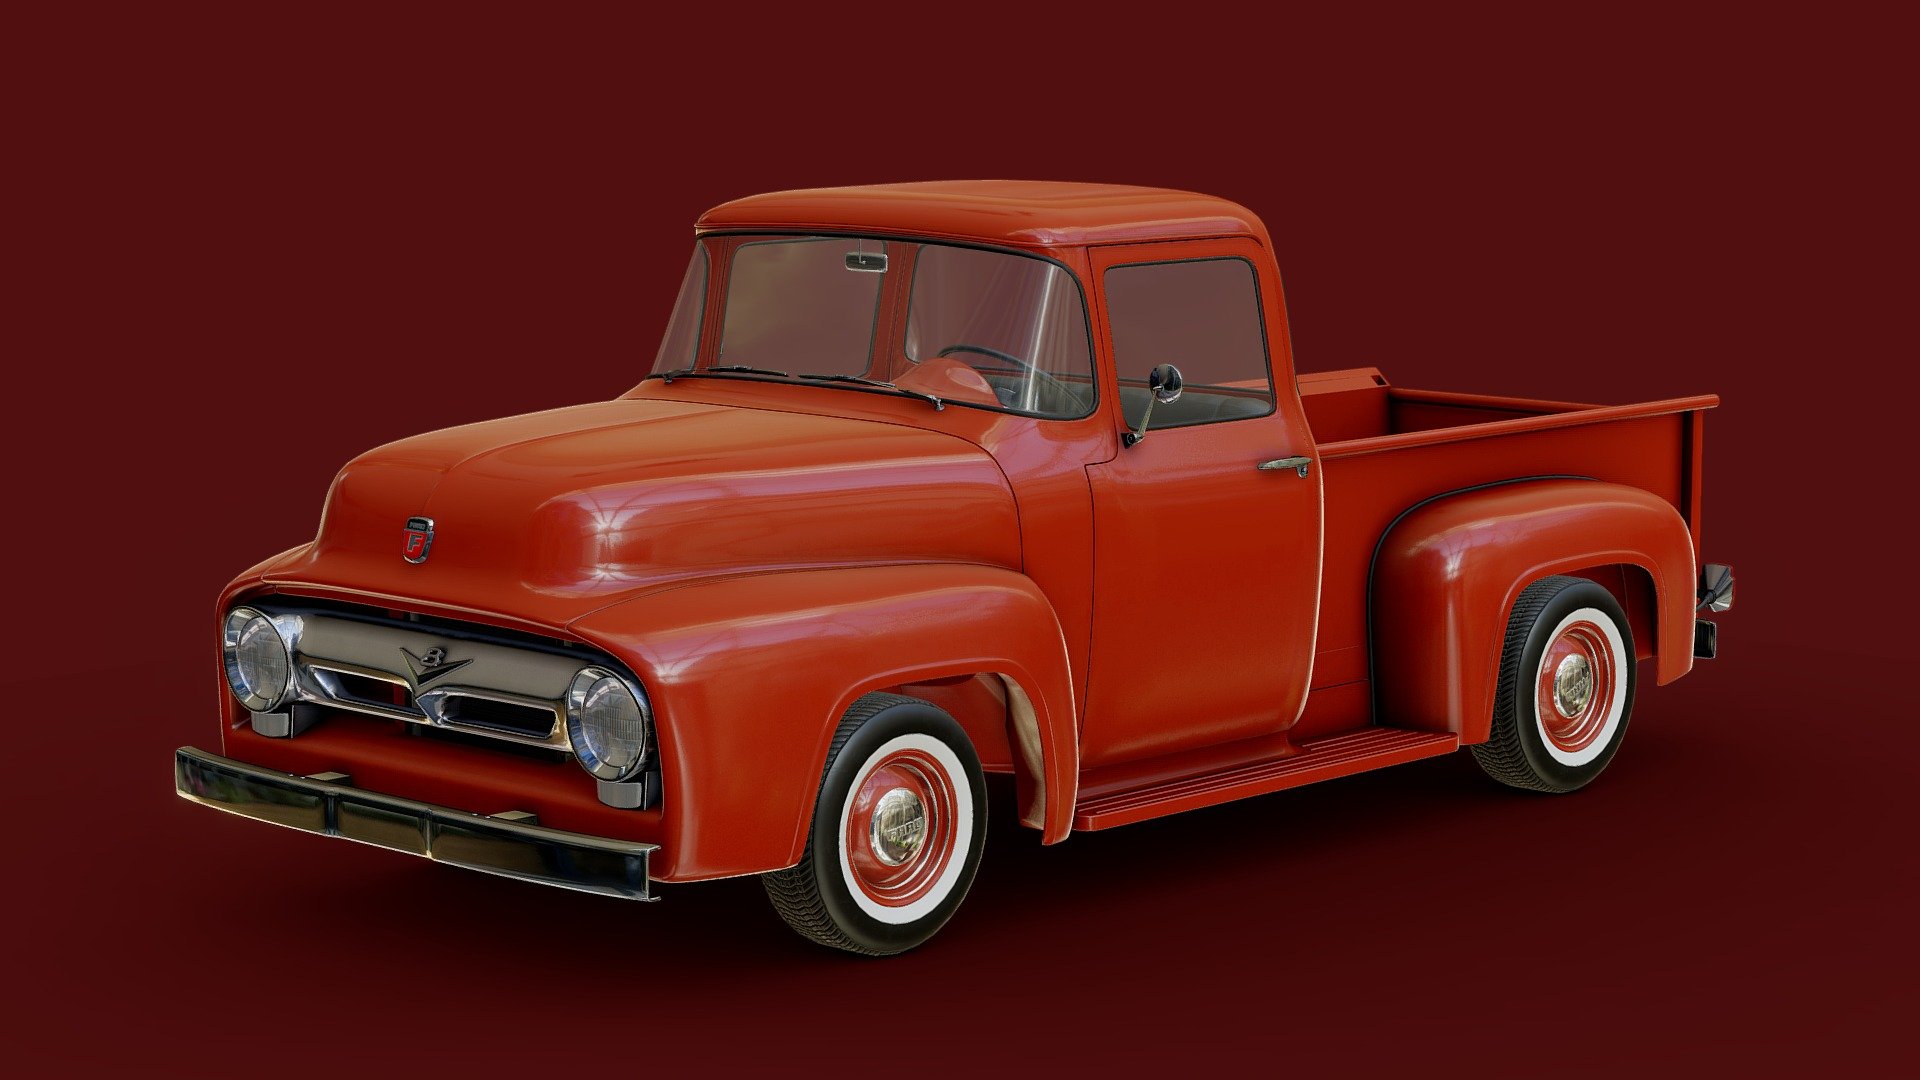 Mid-Poly car based on ford f100

9 texture sets all in 4K resolution.

Color of the body can be easily changed 3d model